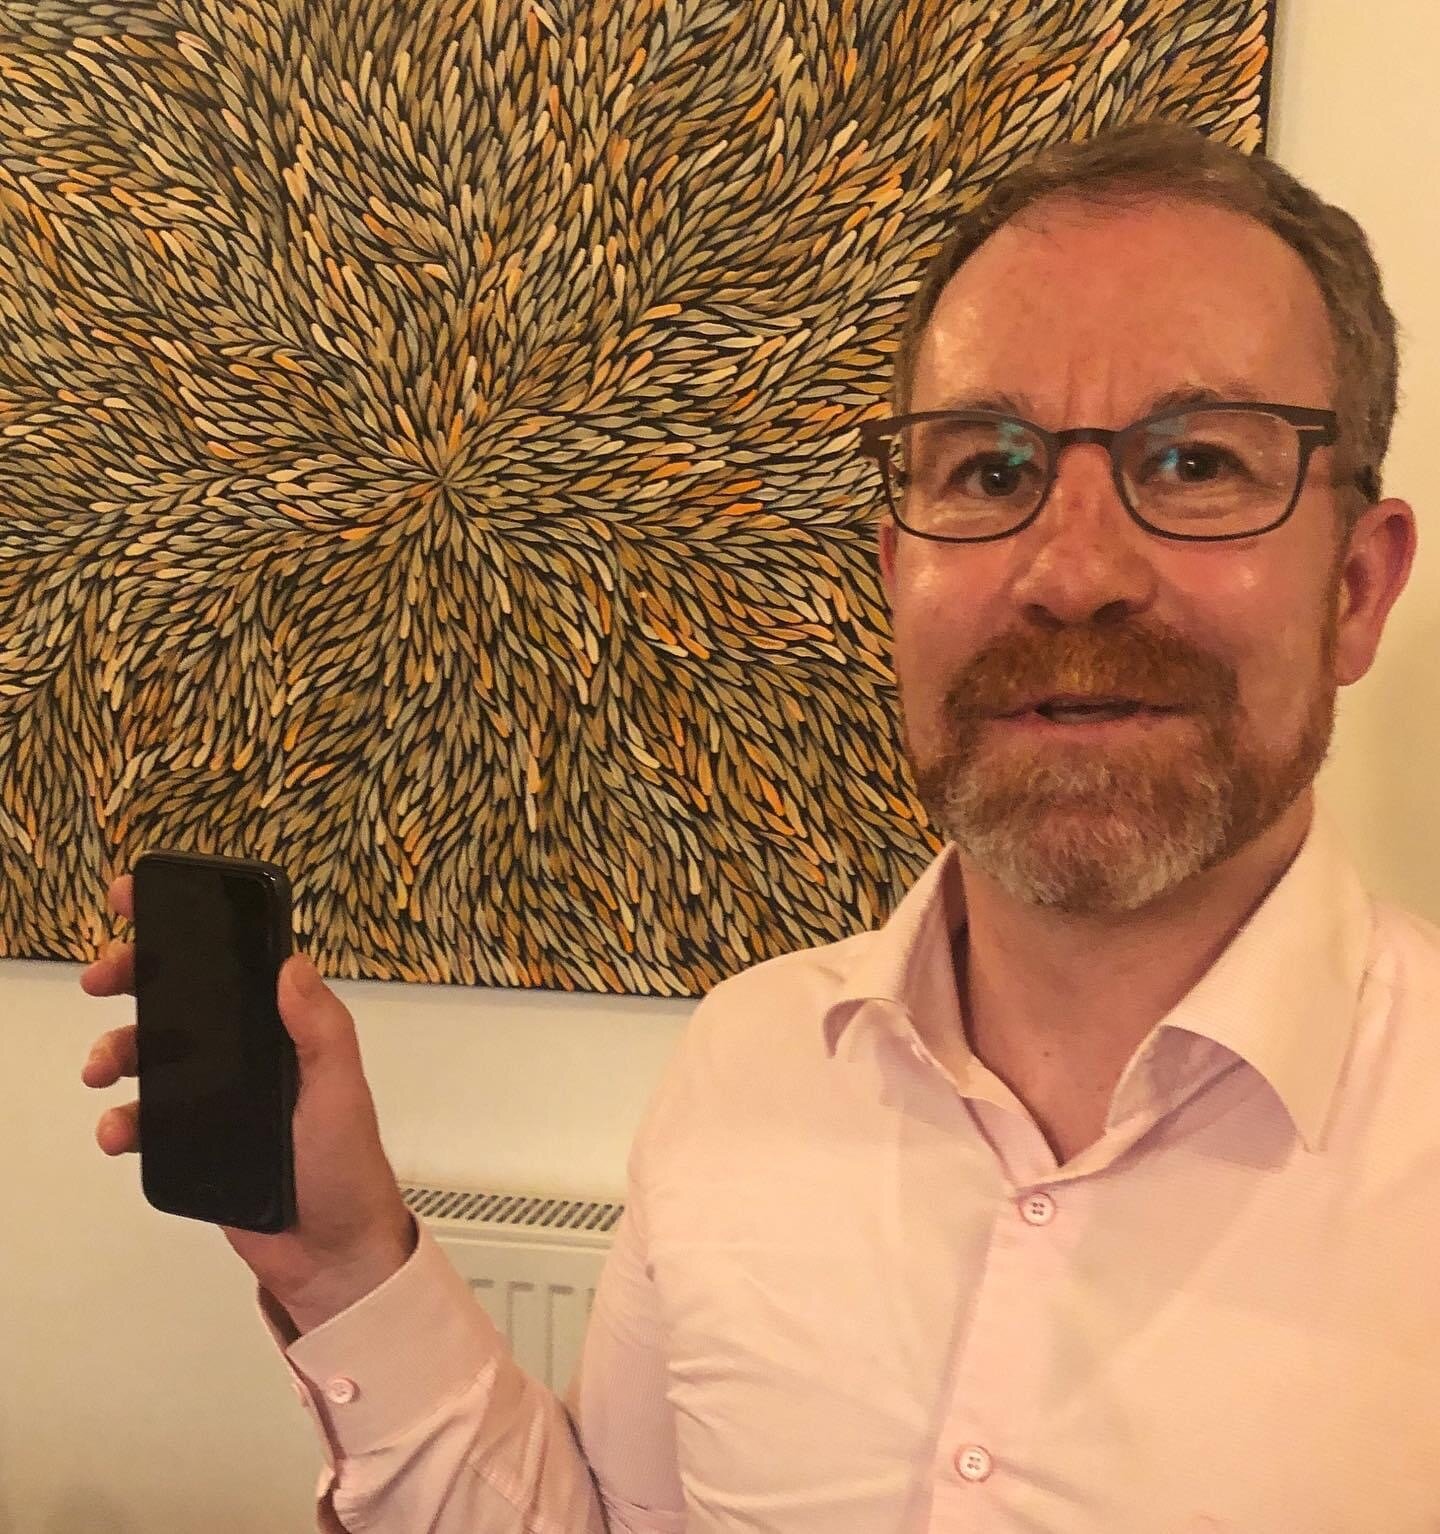 Tom Barker’s object: His phone. (He explains why in the recording.)